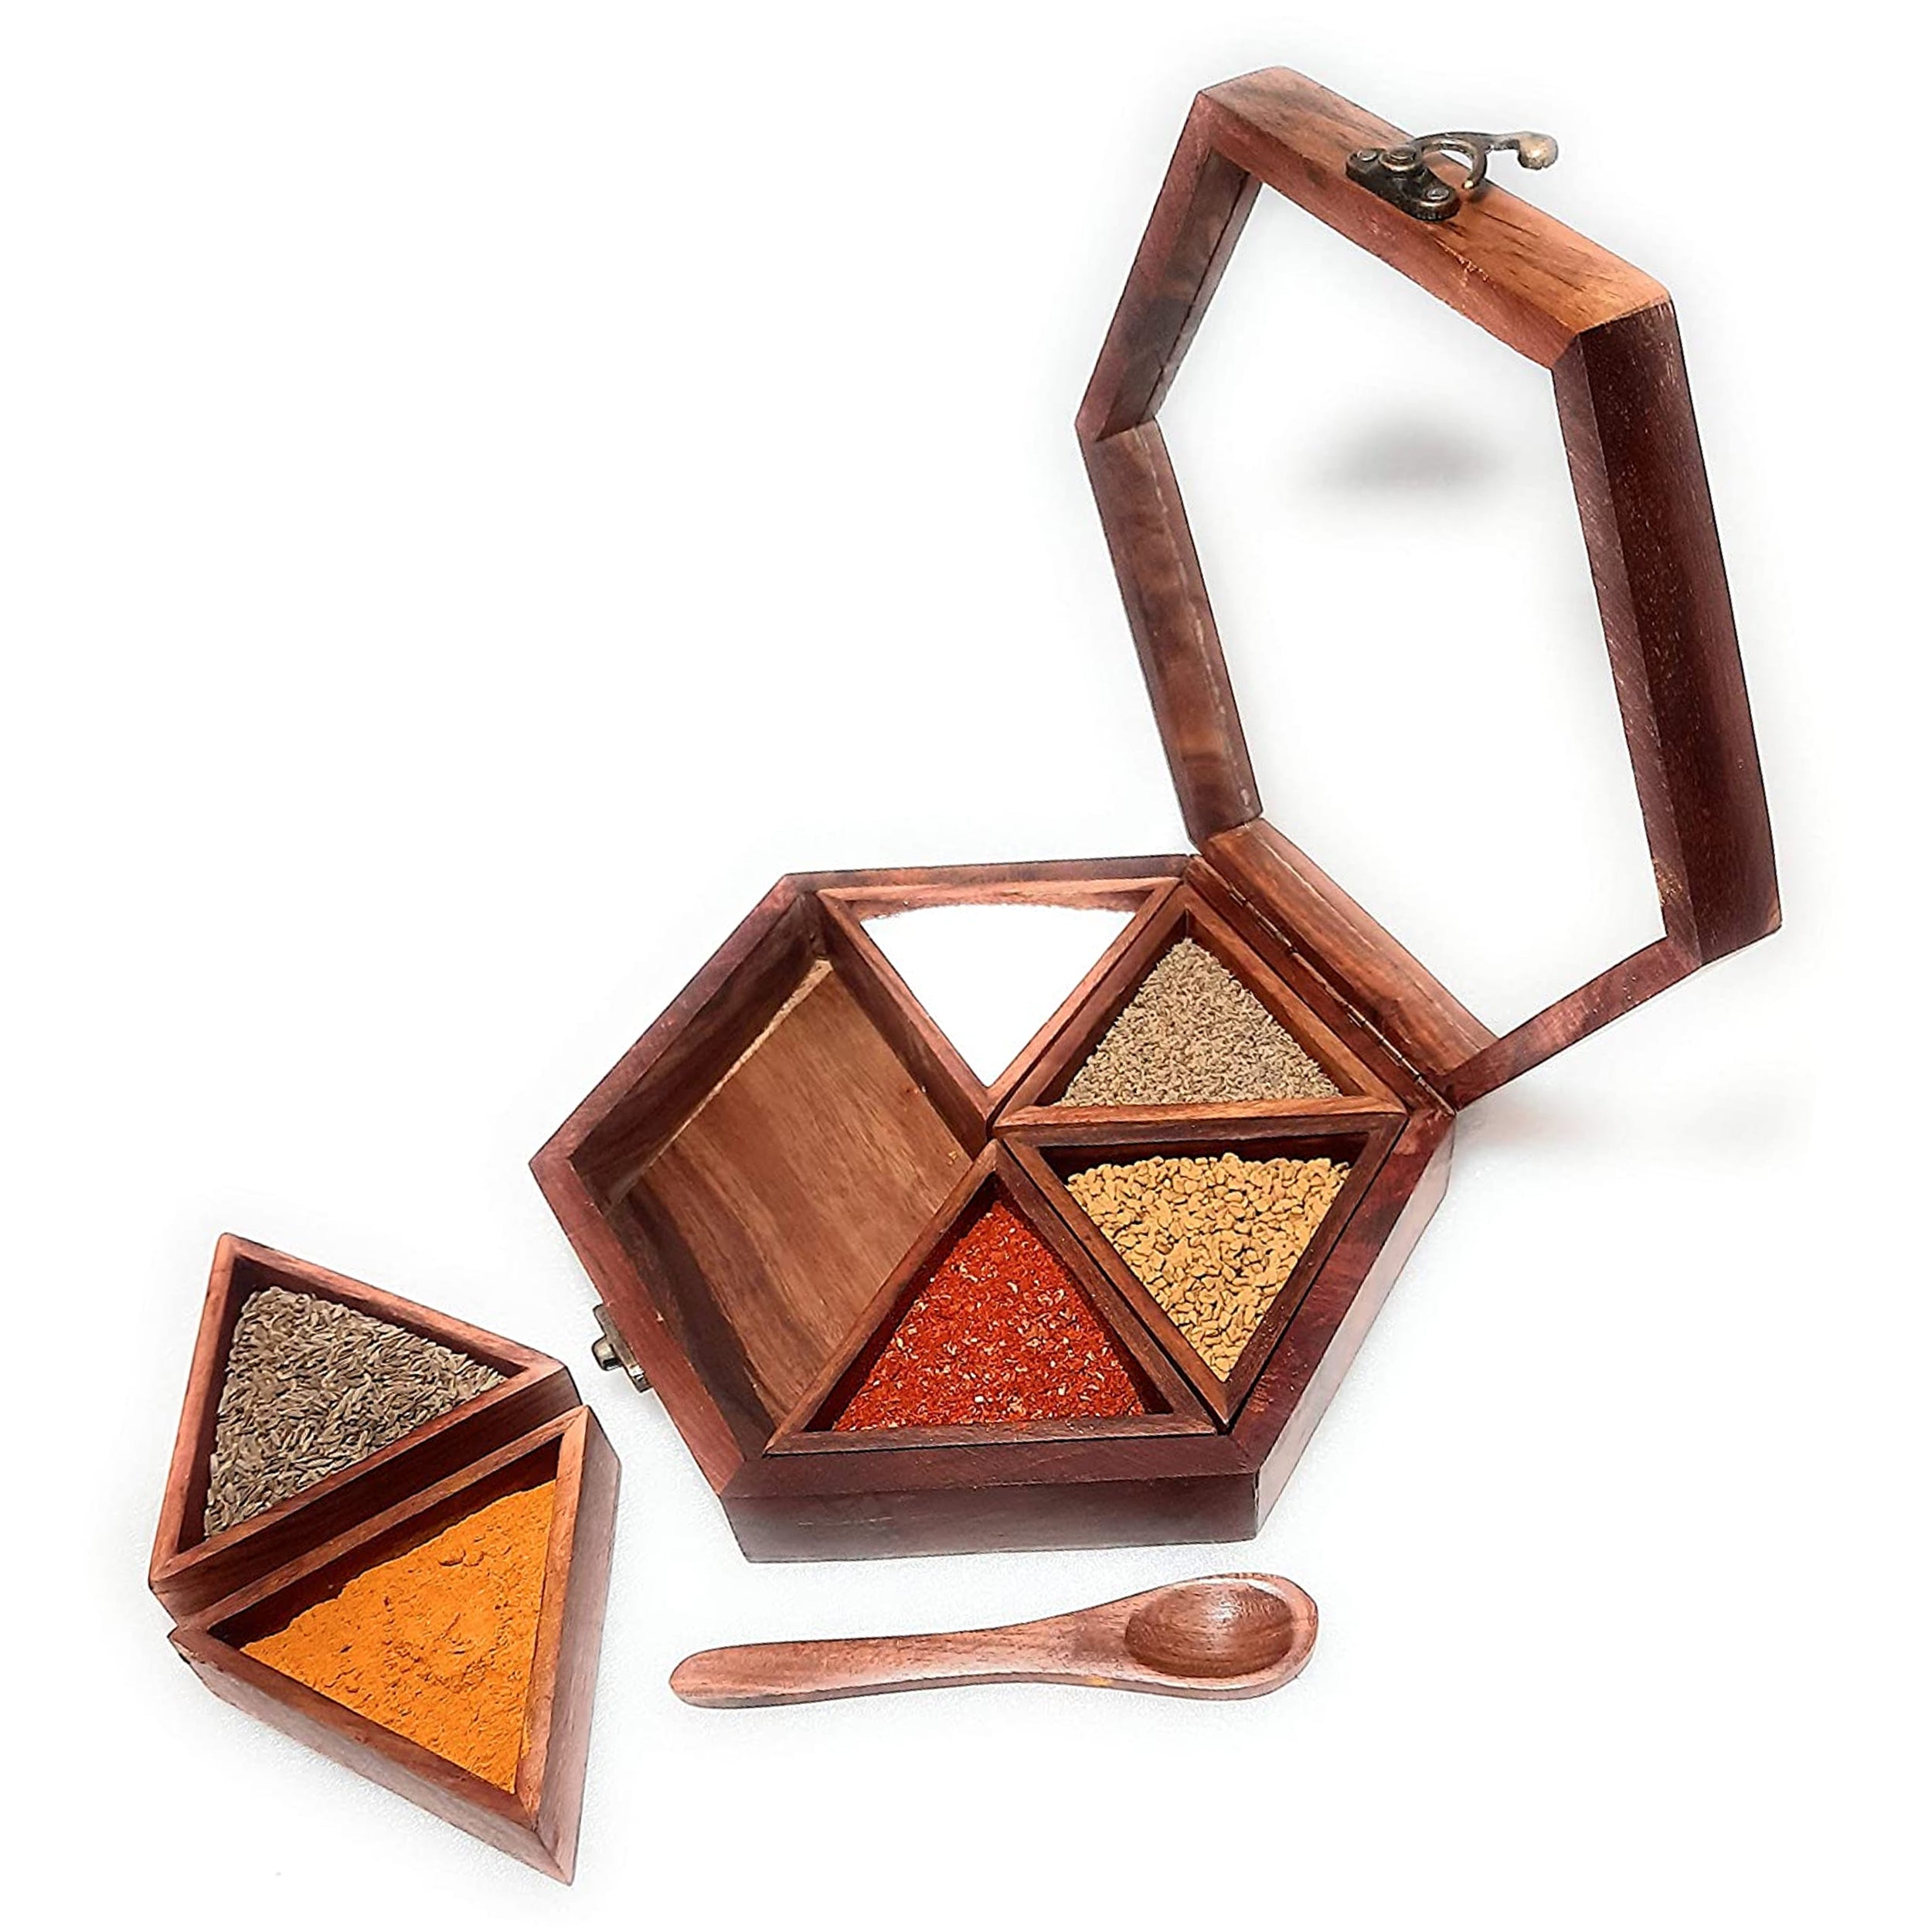 Organize Your Masalas in Style: Handmade Wooden Masala Spice Box with 6 Containers